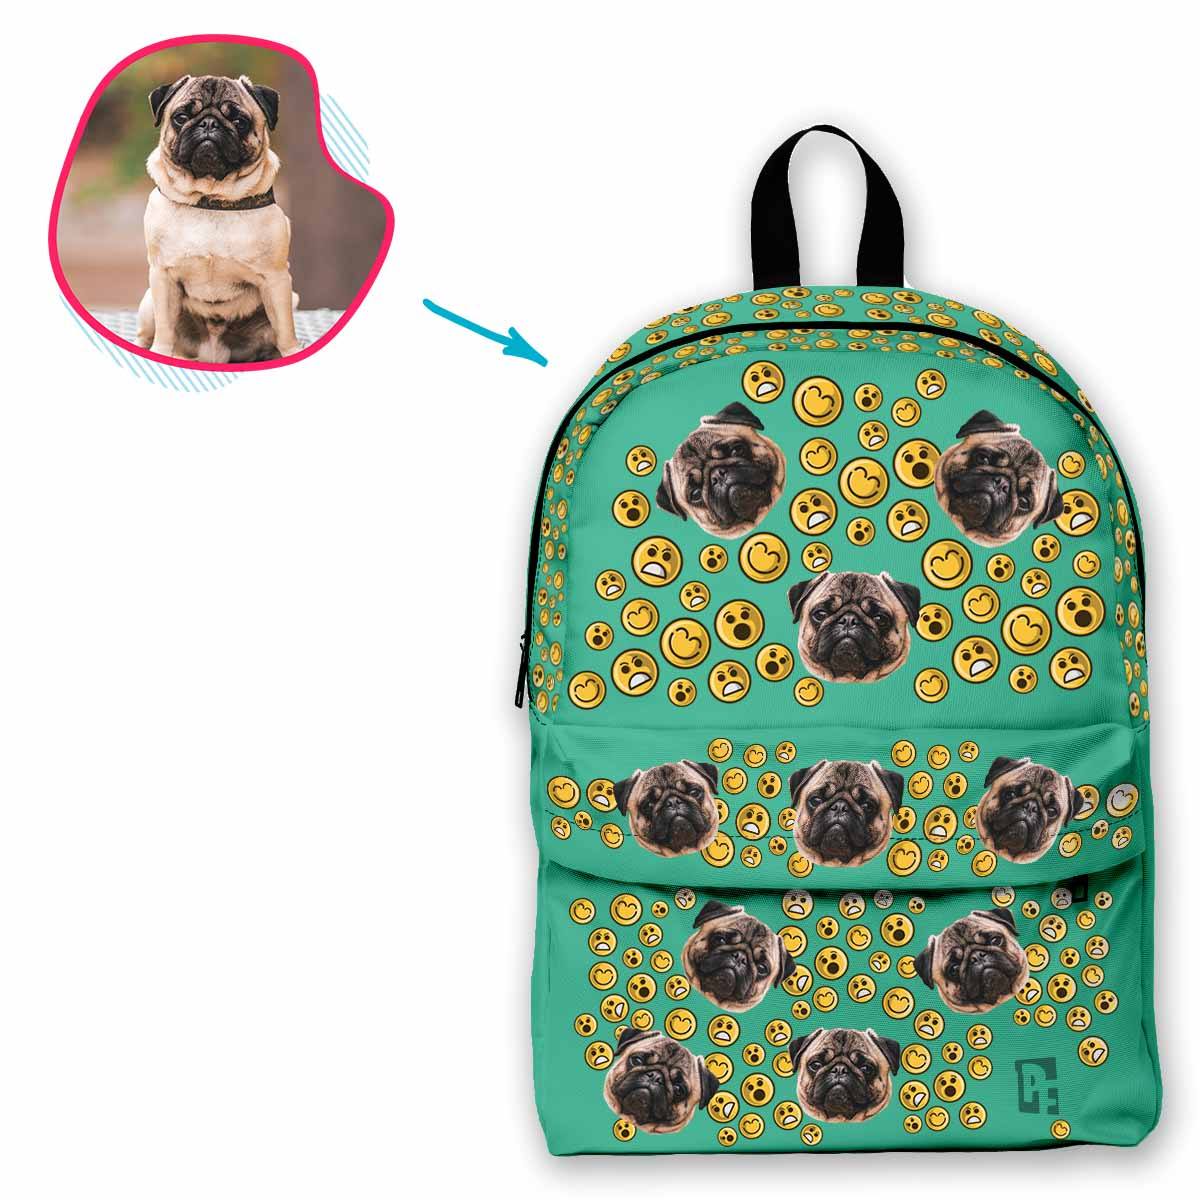 mint Smiles classic backpack personalized with photo of face printed on it